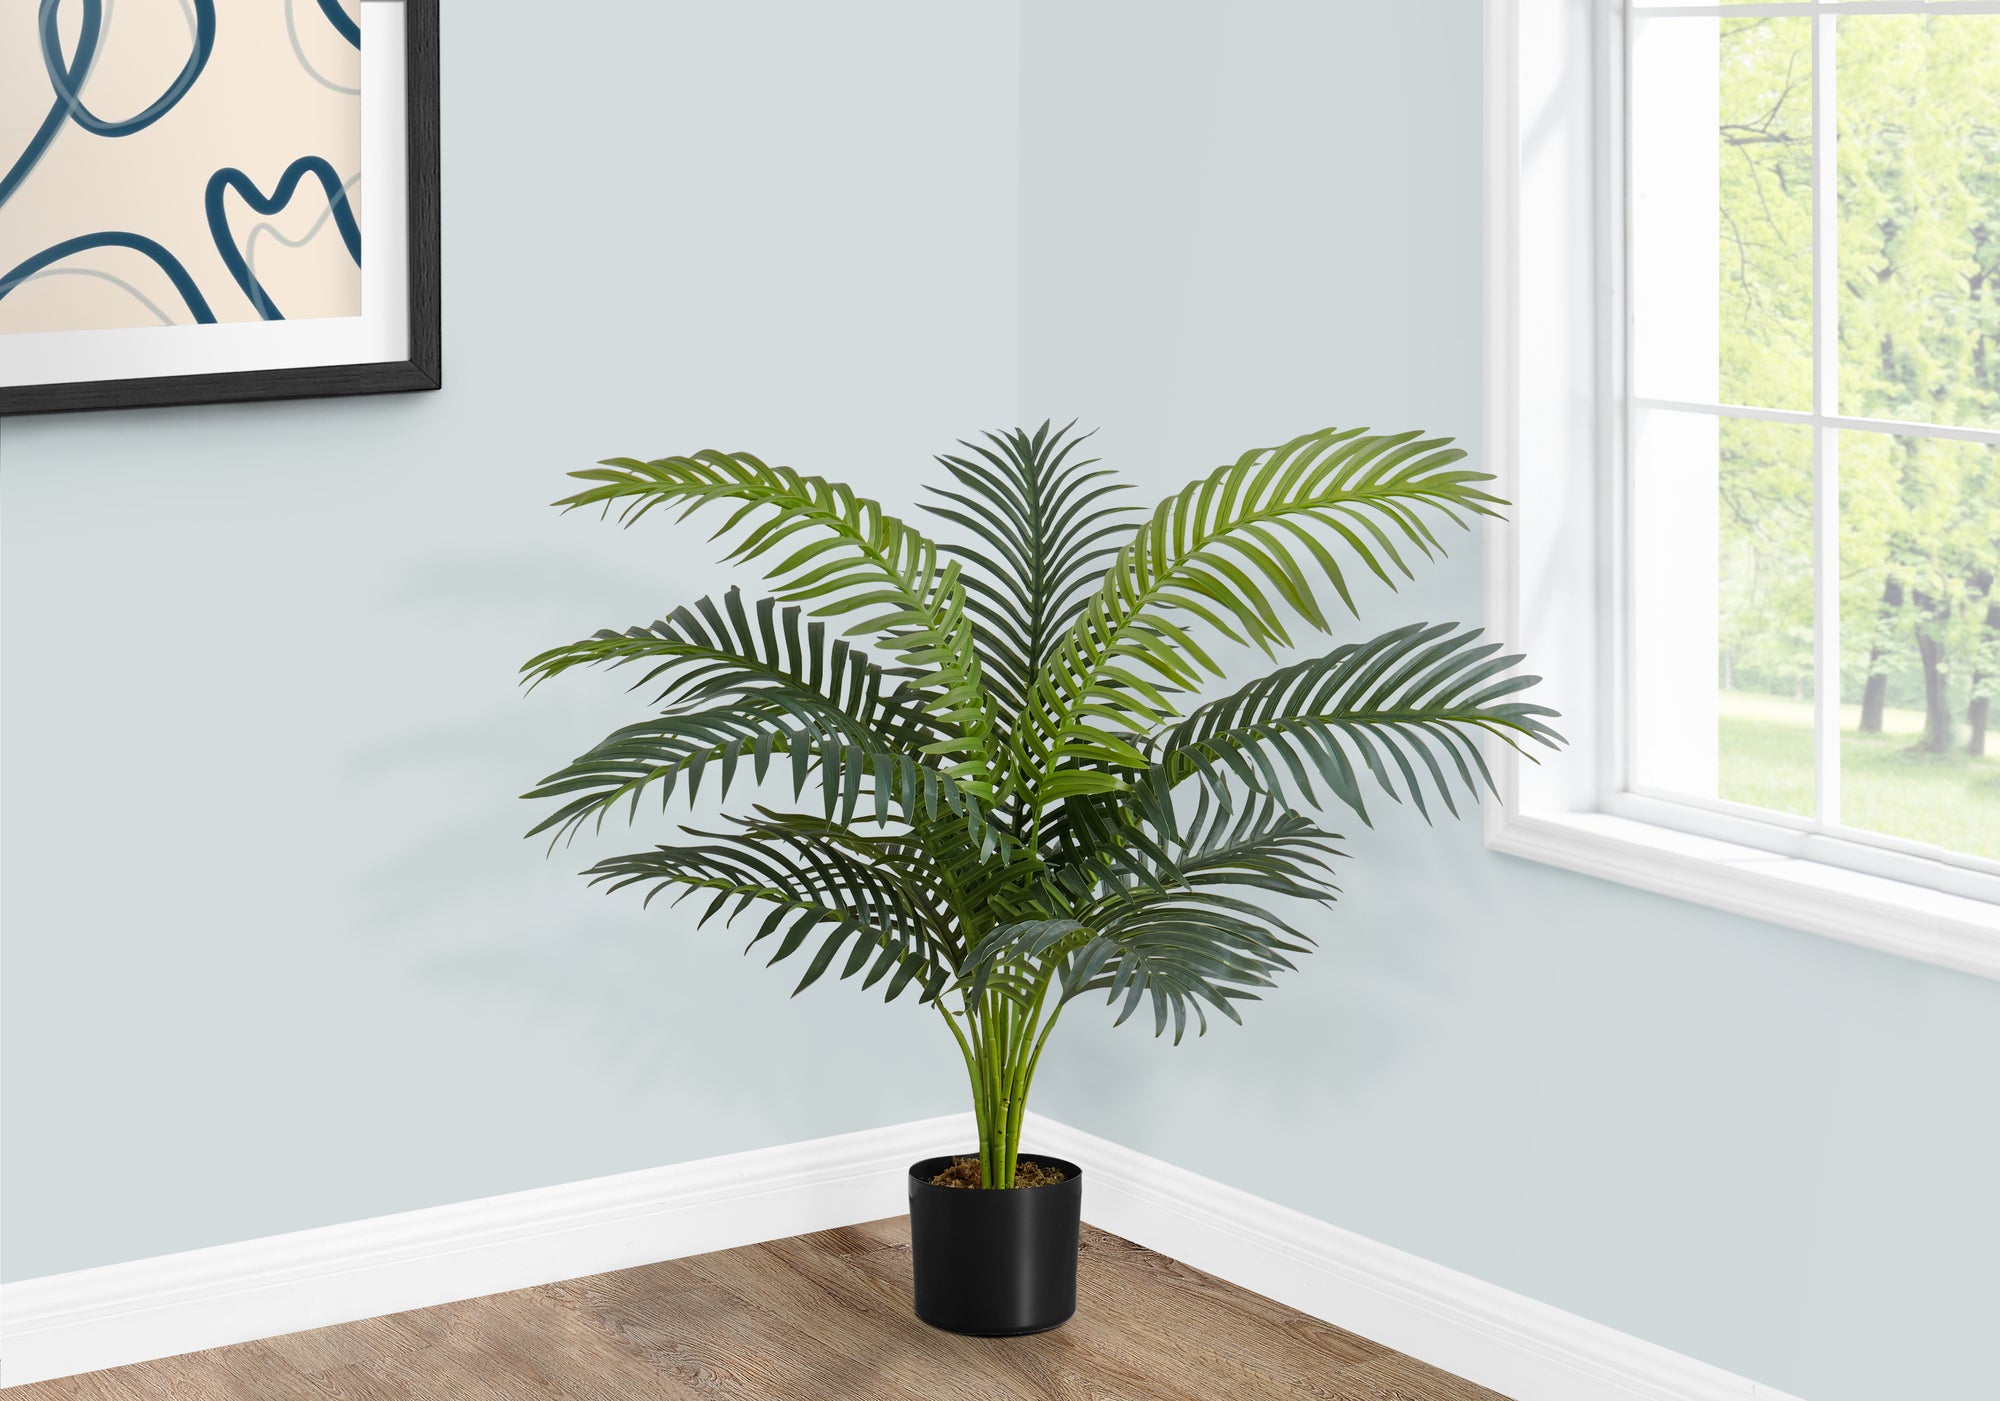 MN-459539    Artificial Plant, 34" Tall, Palm Tree, Indoor, Faux, Fake, Floor, Greenery, Potted, Real Touch, Decorative, Green Leaves, Black Pot